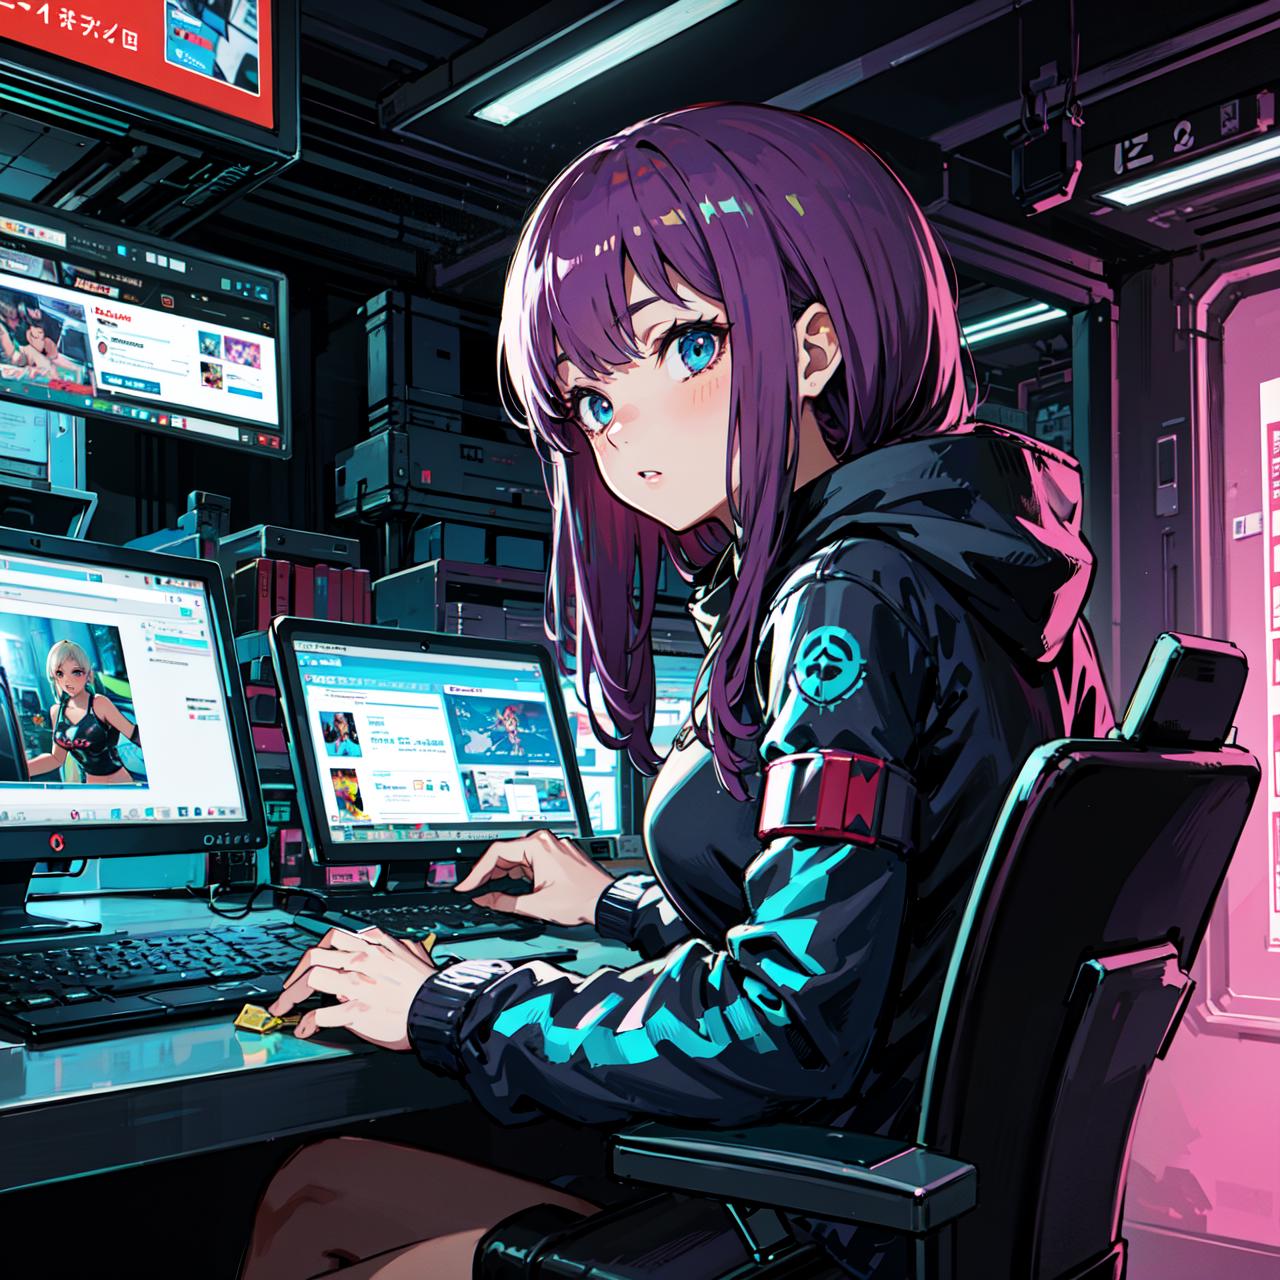 Hacked over 10,000 devices to download anime | How smart Technology  changing lives